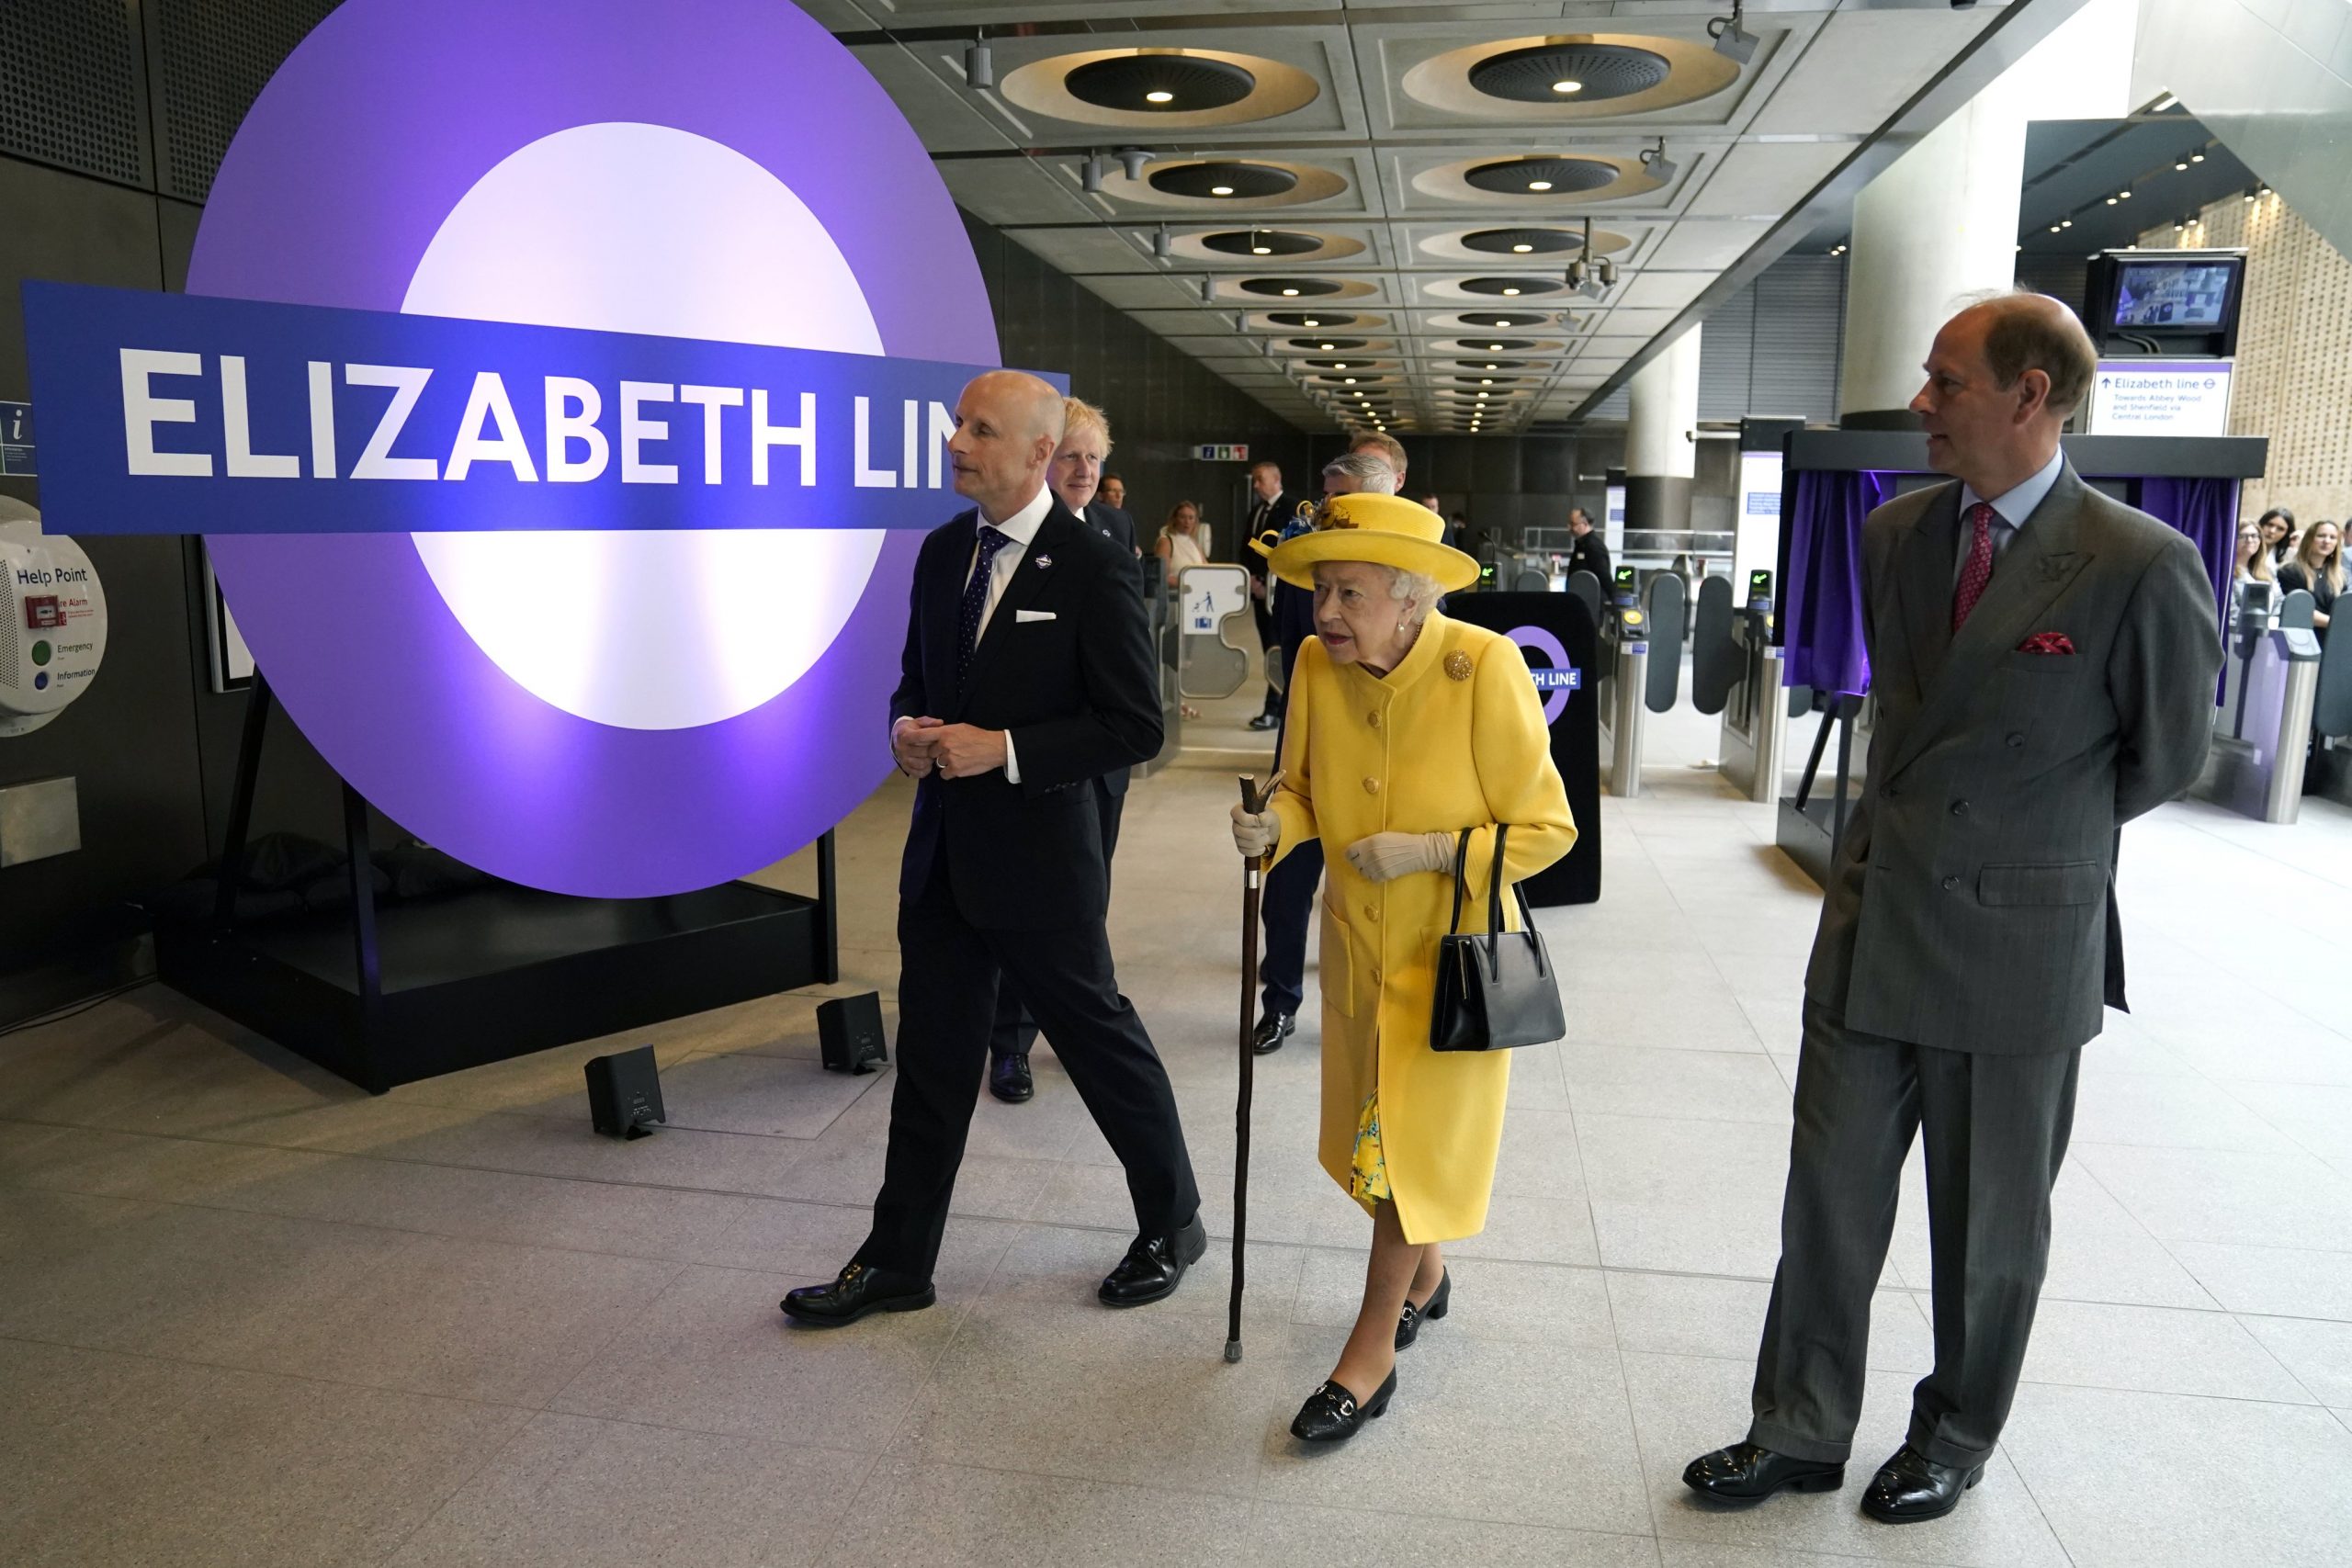 The Queen marks the official opening of the Elizabeth line